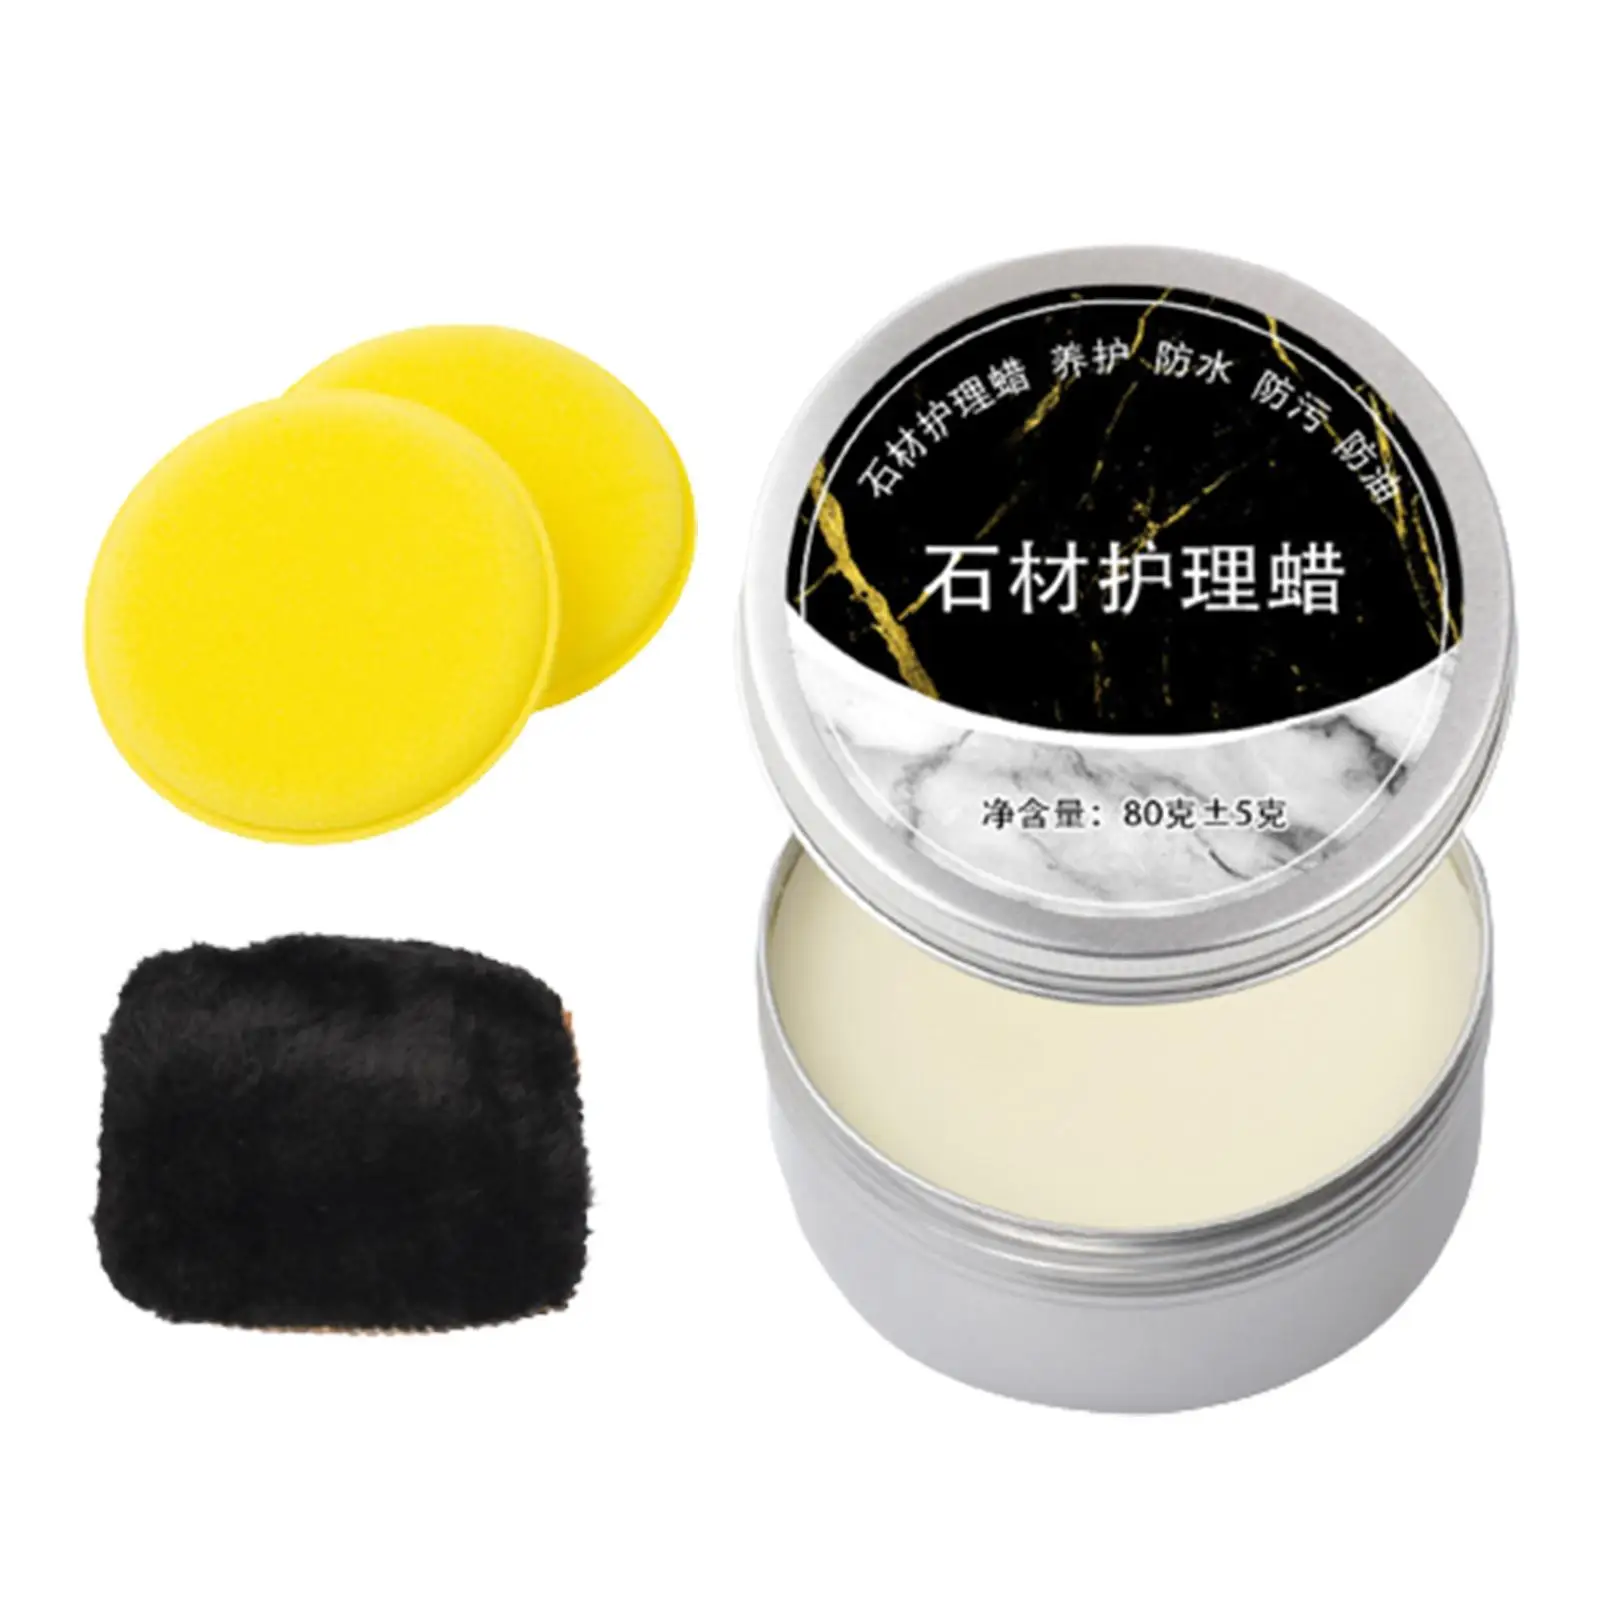 Beeswax Polish for Wood Furniture 80G Waterproof Home Cleaning Wood Seasoning Beewax for Marble Floors Chairs Kitchen Cabinets